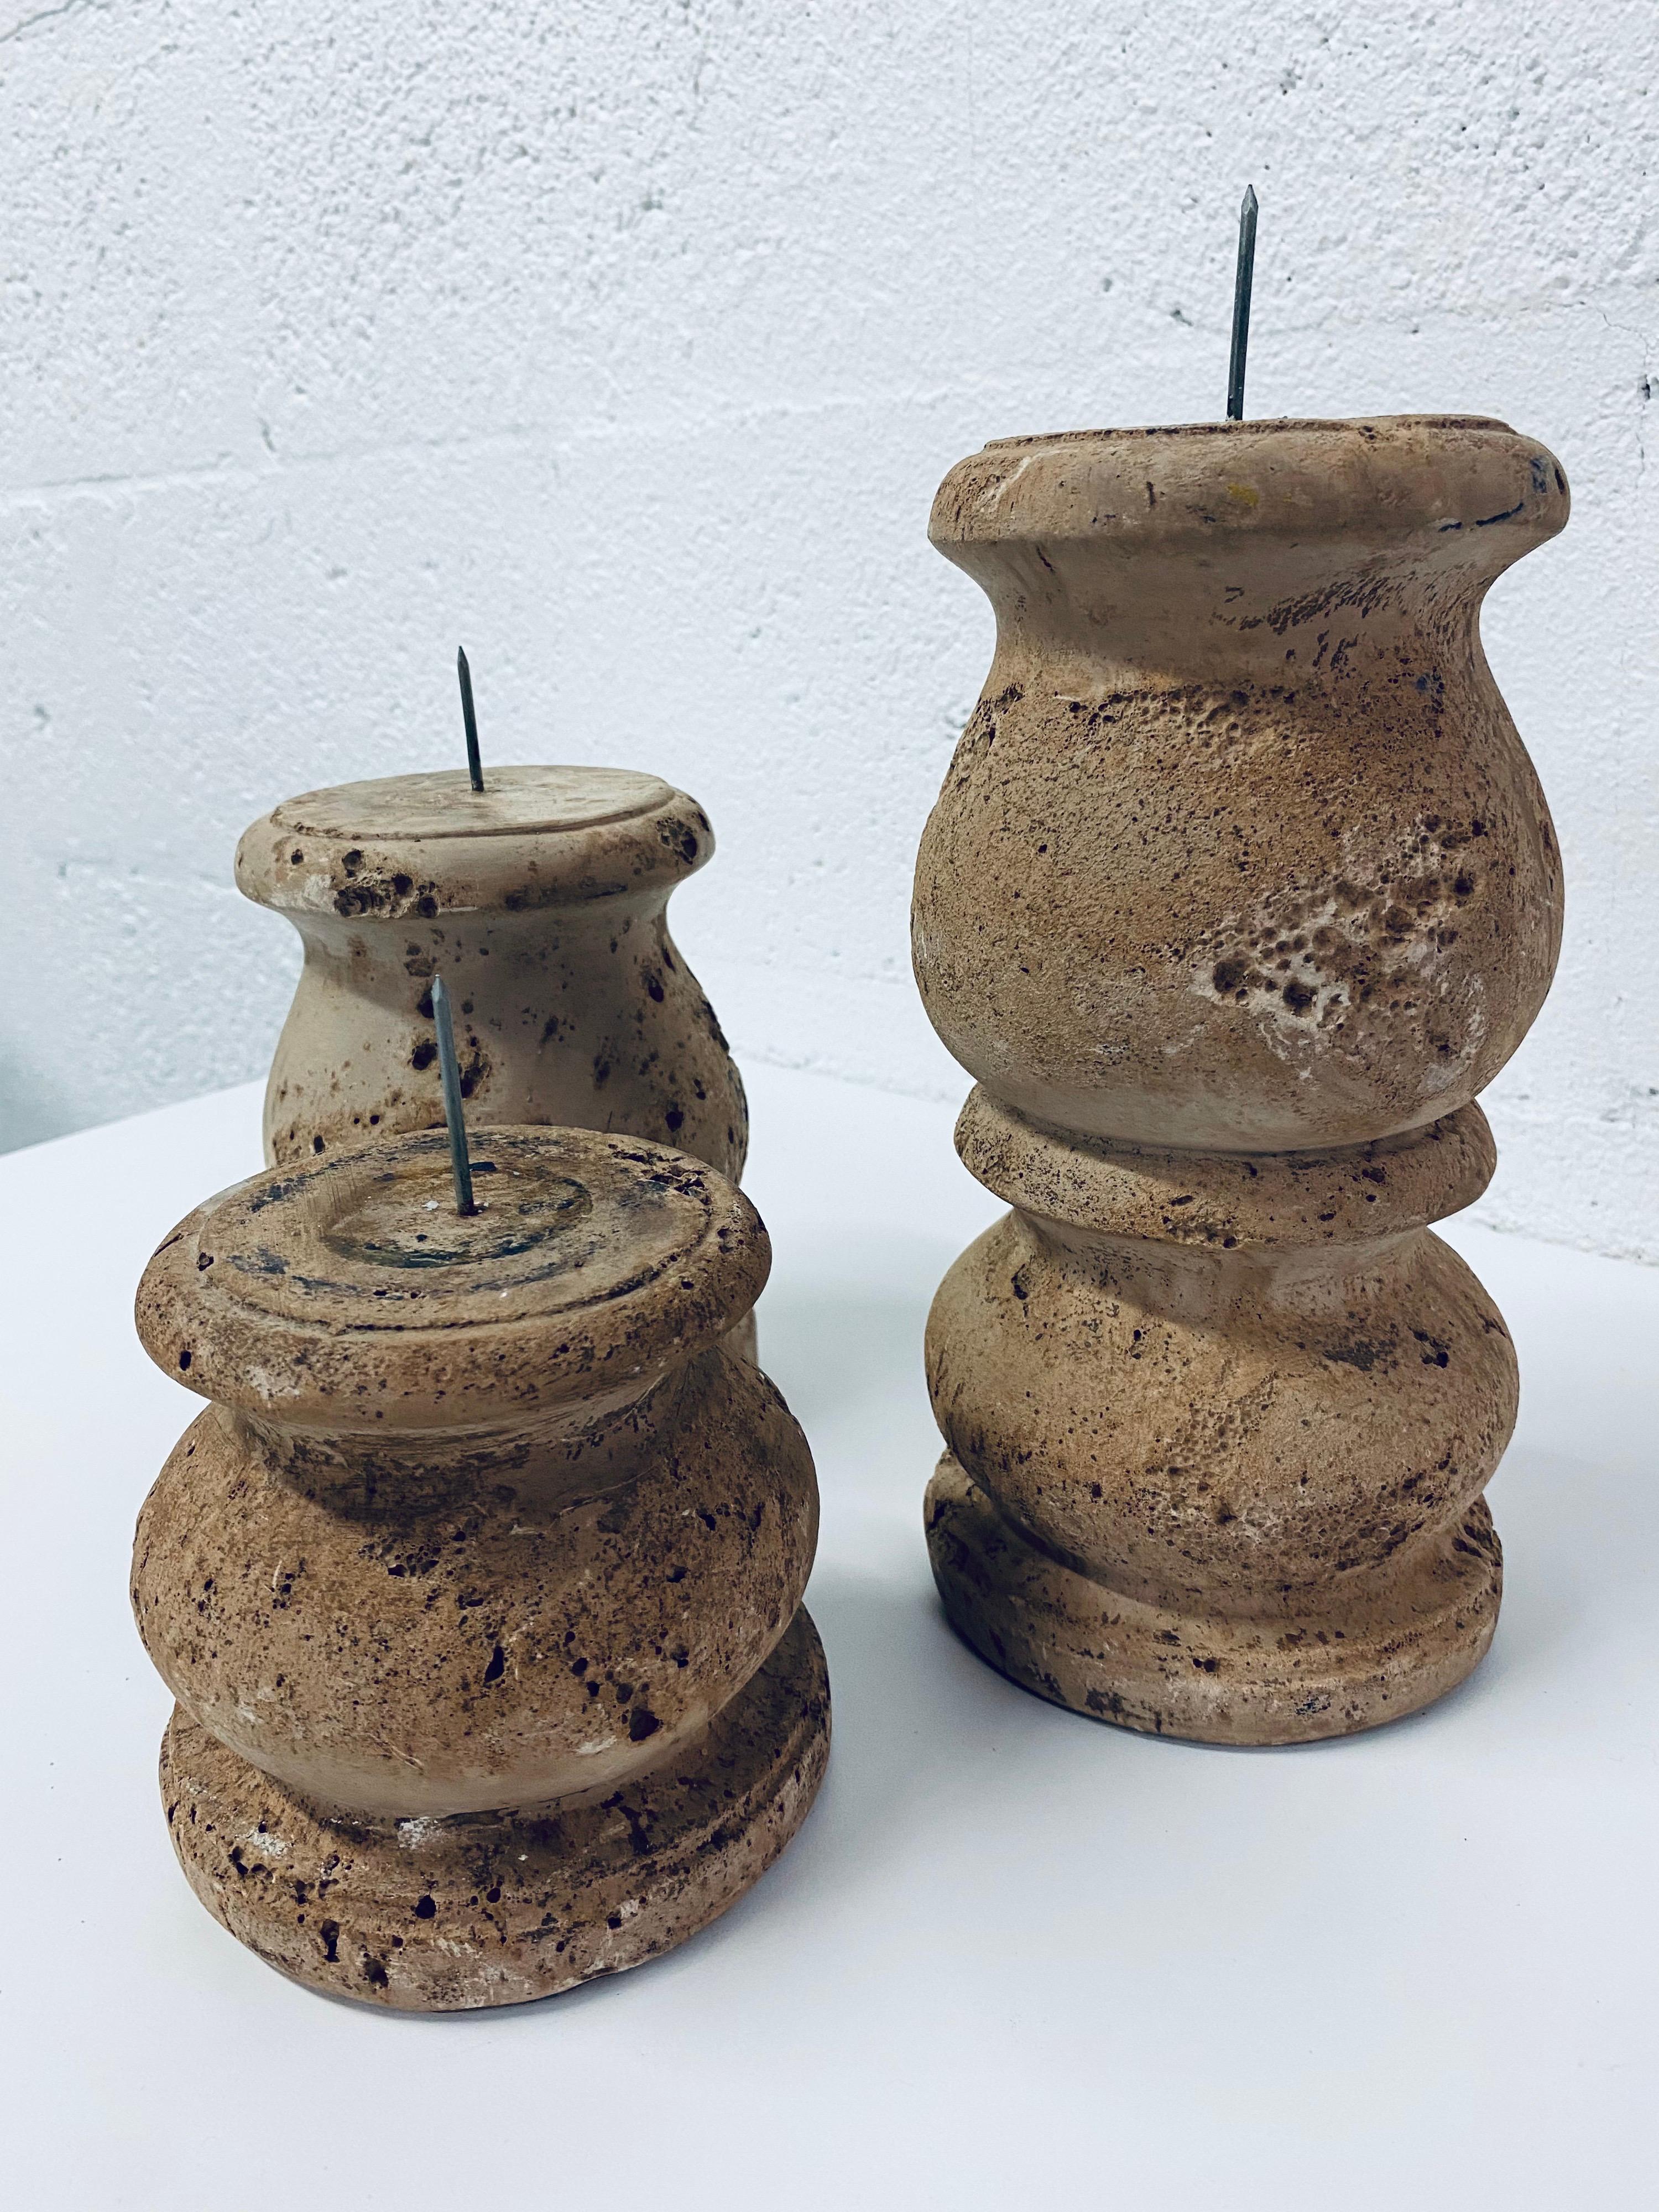 Set of three midcentury candlestick holders by Jaru made of brown/tan cast stone.

Measurements (does not include the 1-1/2